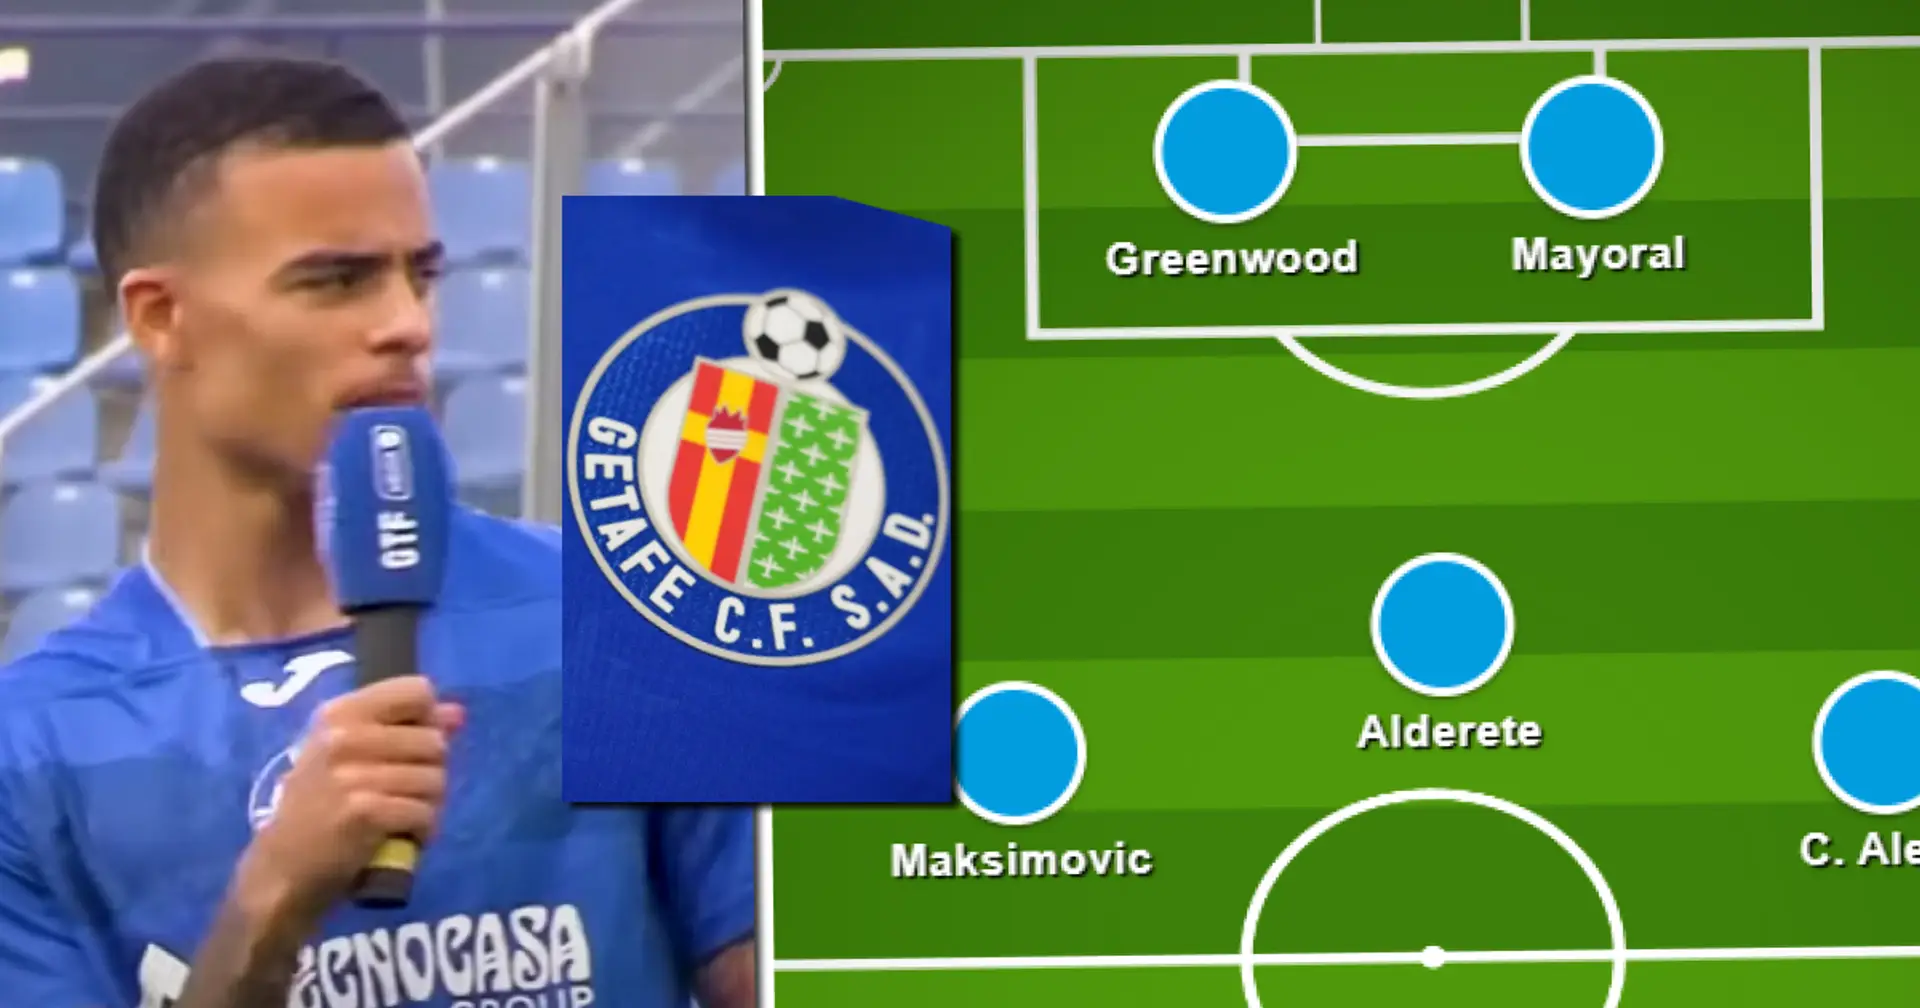 Getafe's potential XI with Greenwood in — Mason has to replace one of La Liga's top scorers